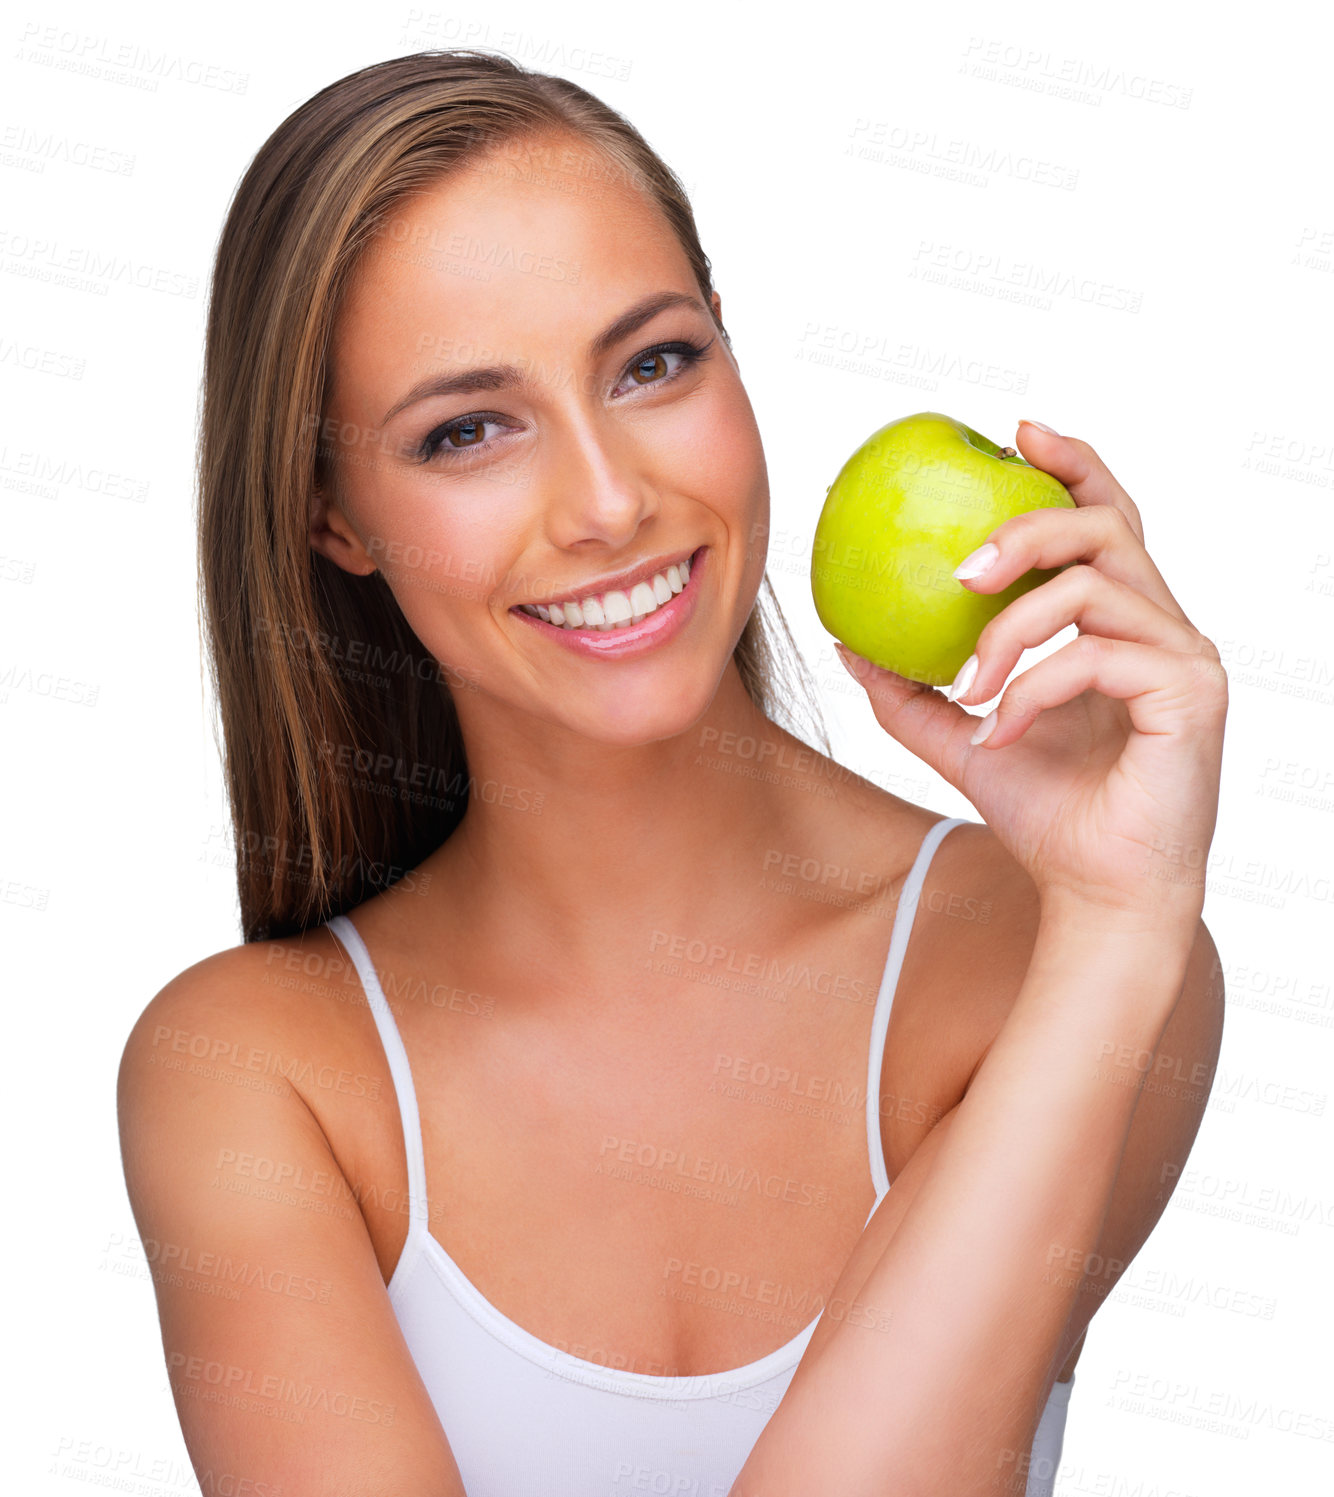 Buy stock photo A young woman smiling while she holds an apple - isolated